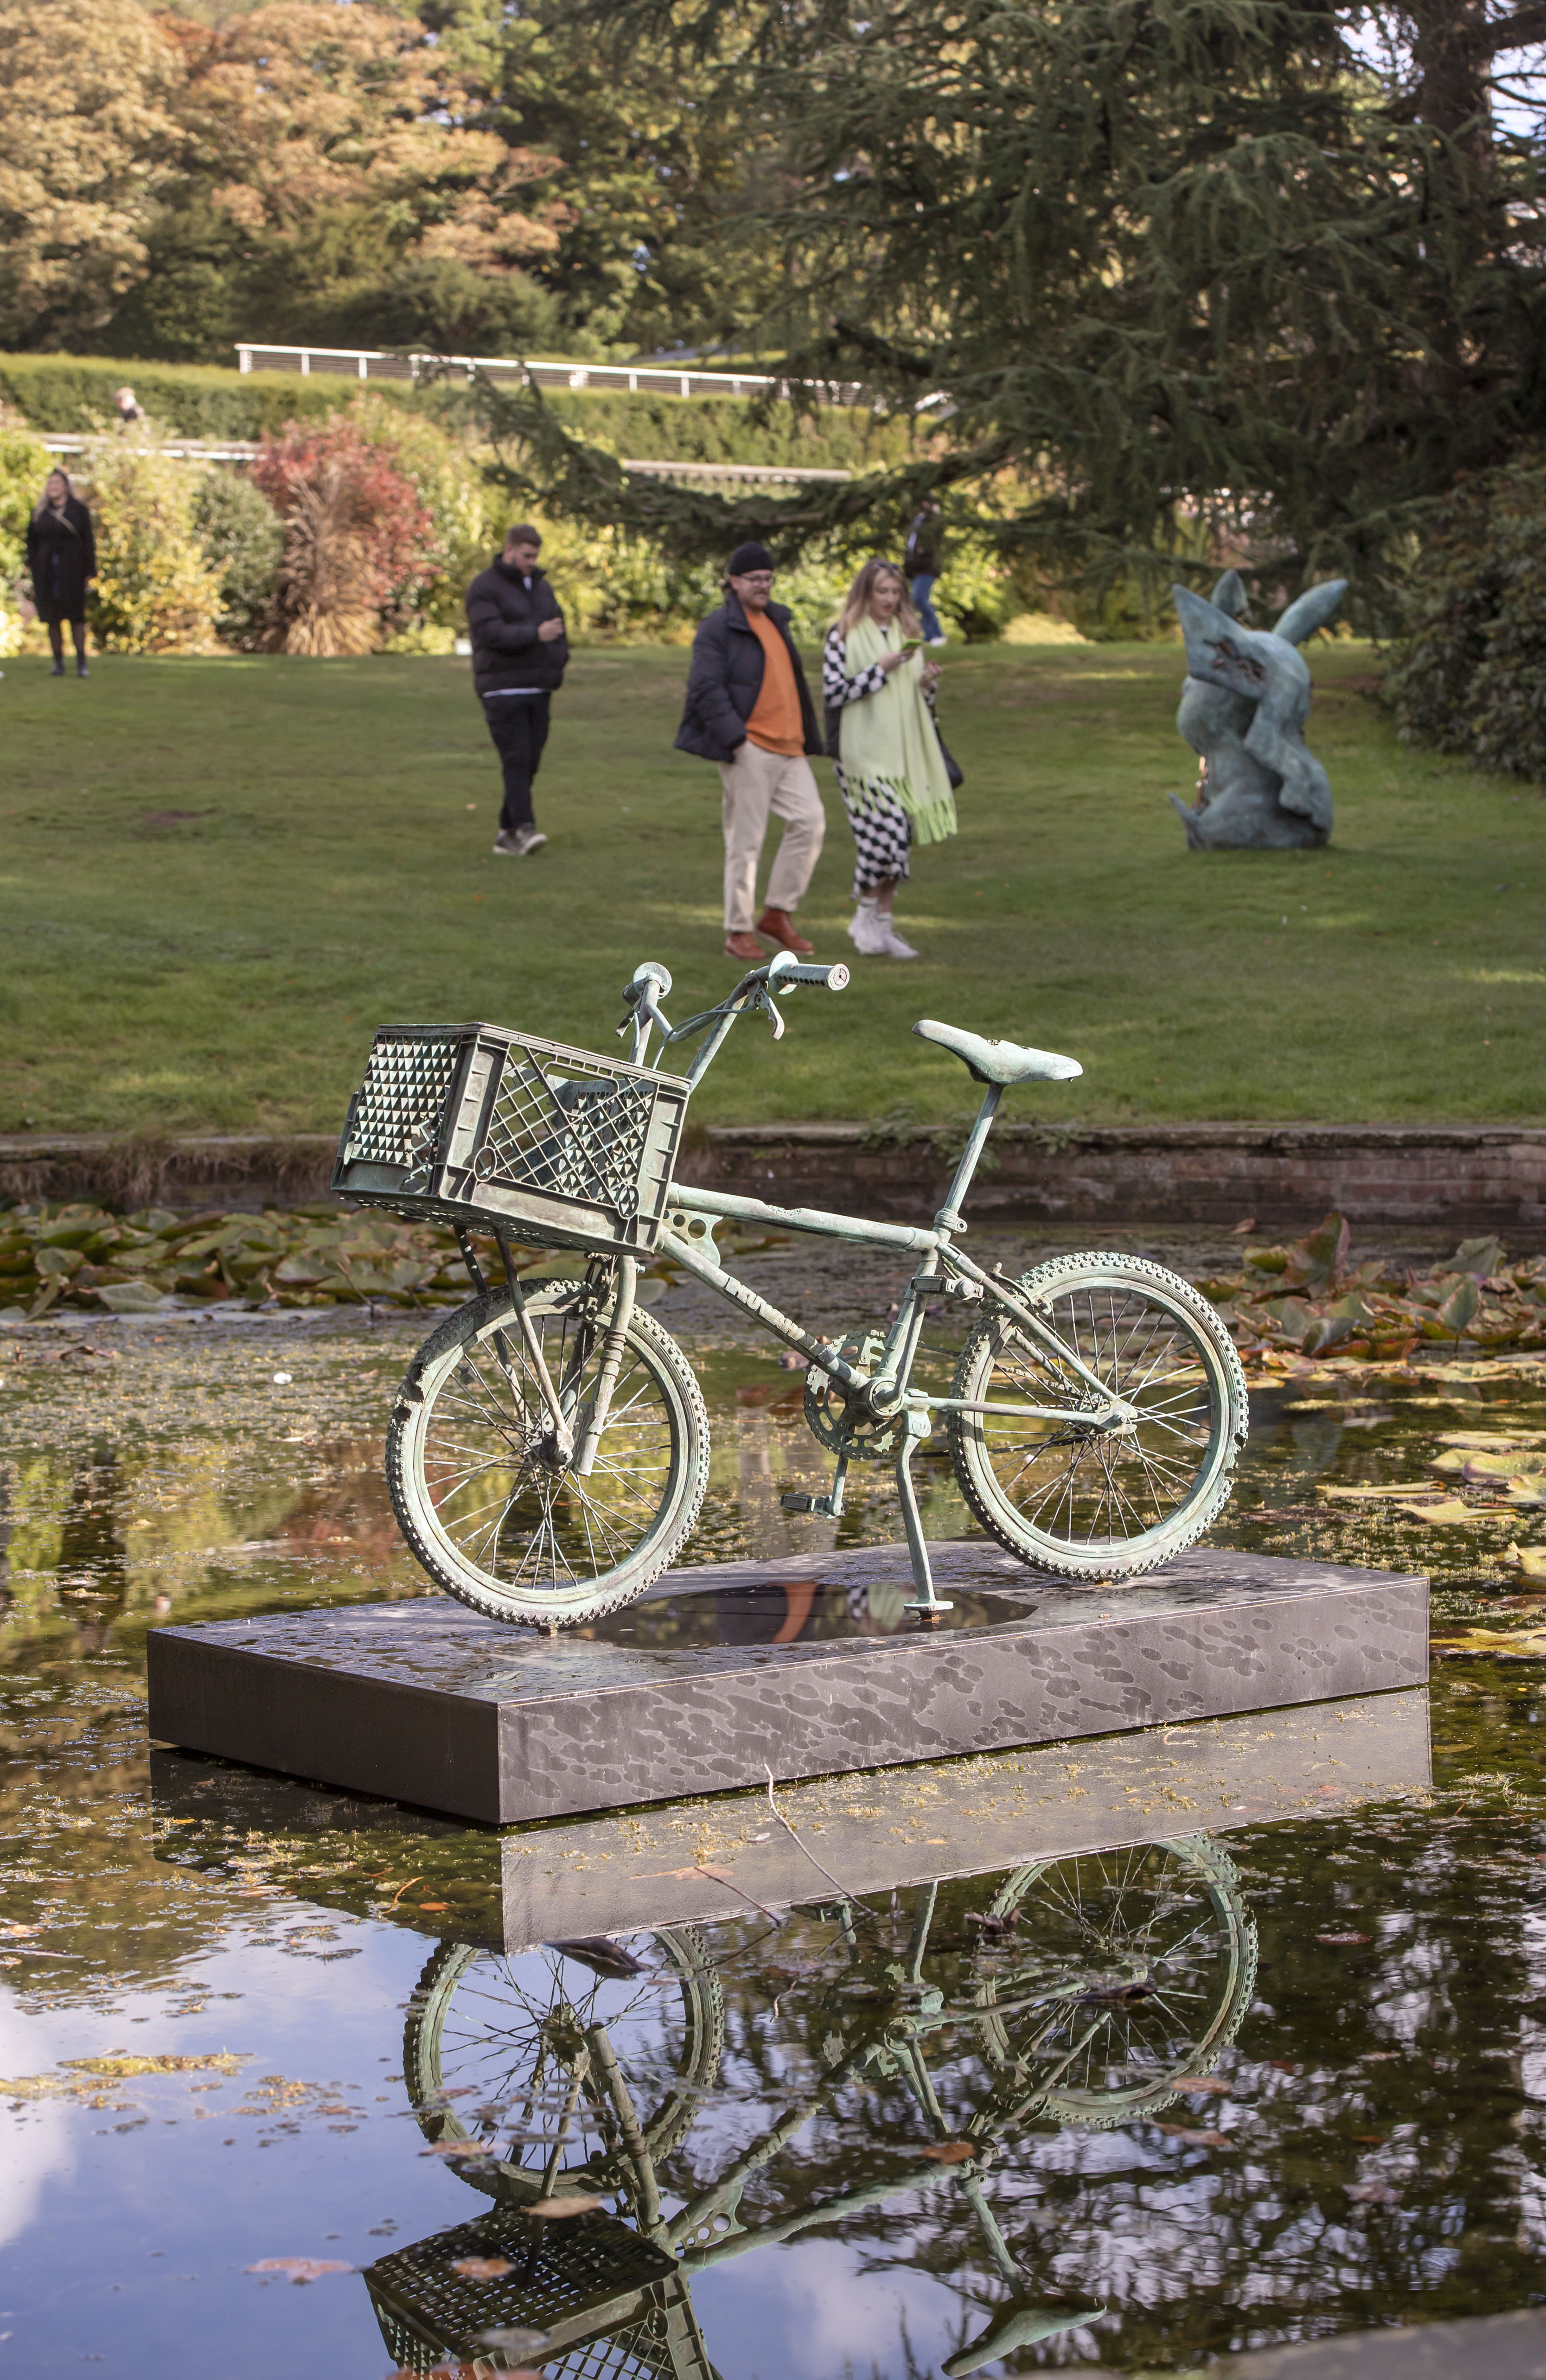 A bronze bicycle sculpture displayed on a plinth in the middle of a pond.